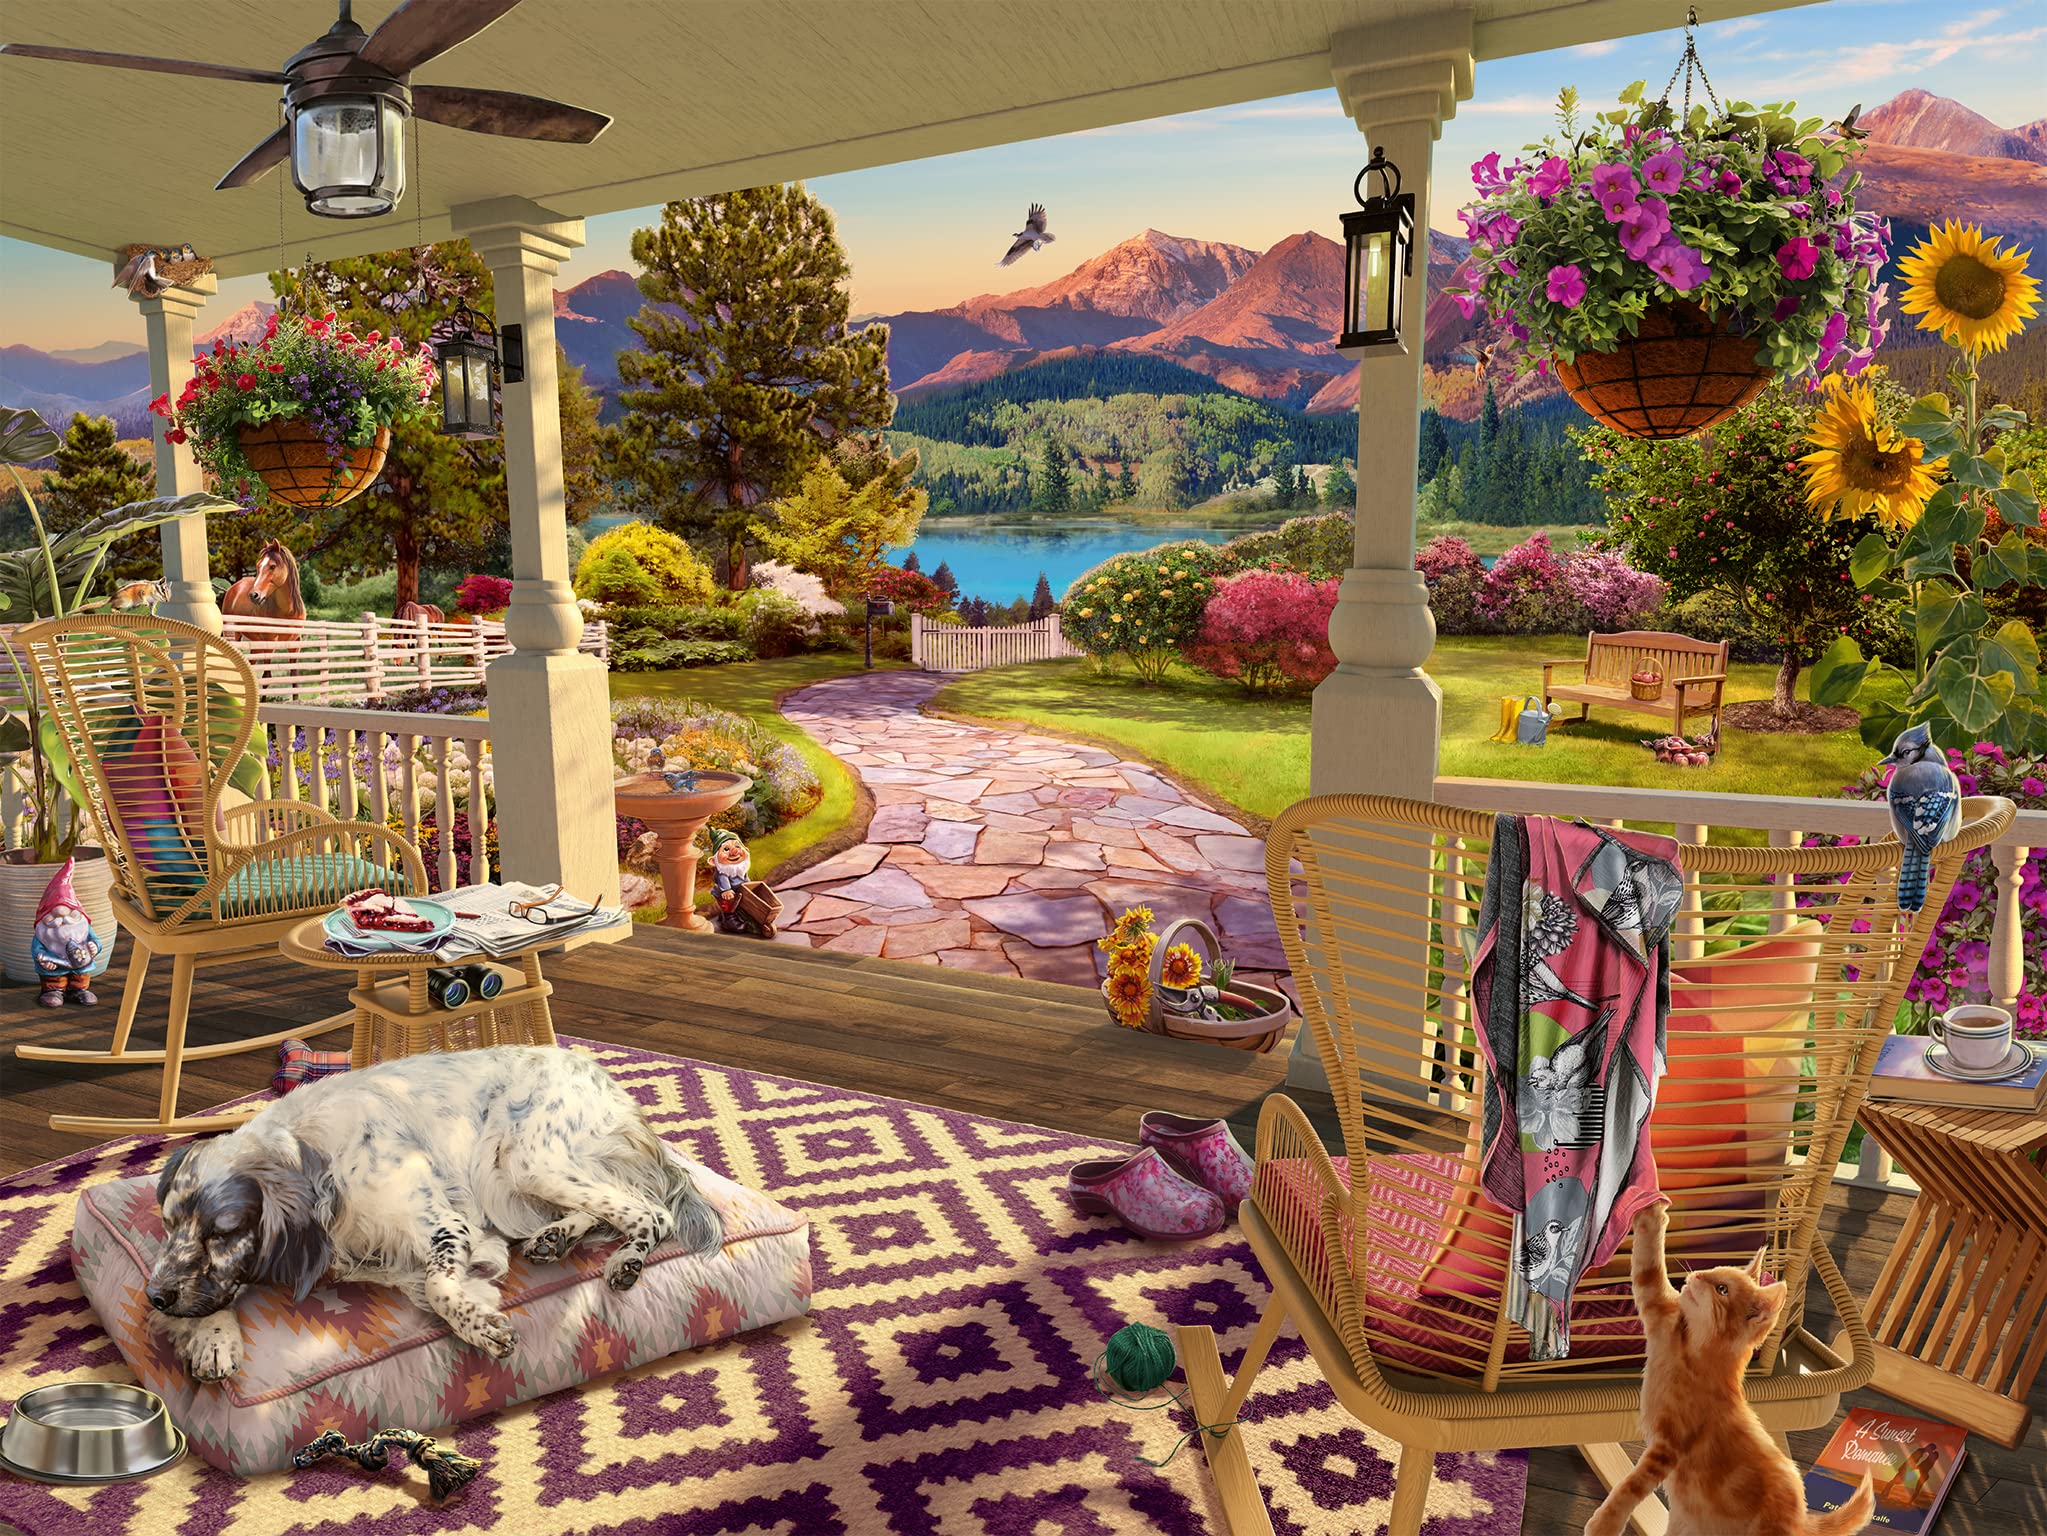 Ravensburger Cozy Front Porch 750 Piece Large Format Jigsaw Puzzle - 17457 - Every Piece is Unique, Softclick Technology Means Pieces Fit Together Perfectly